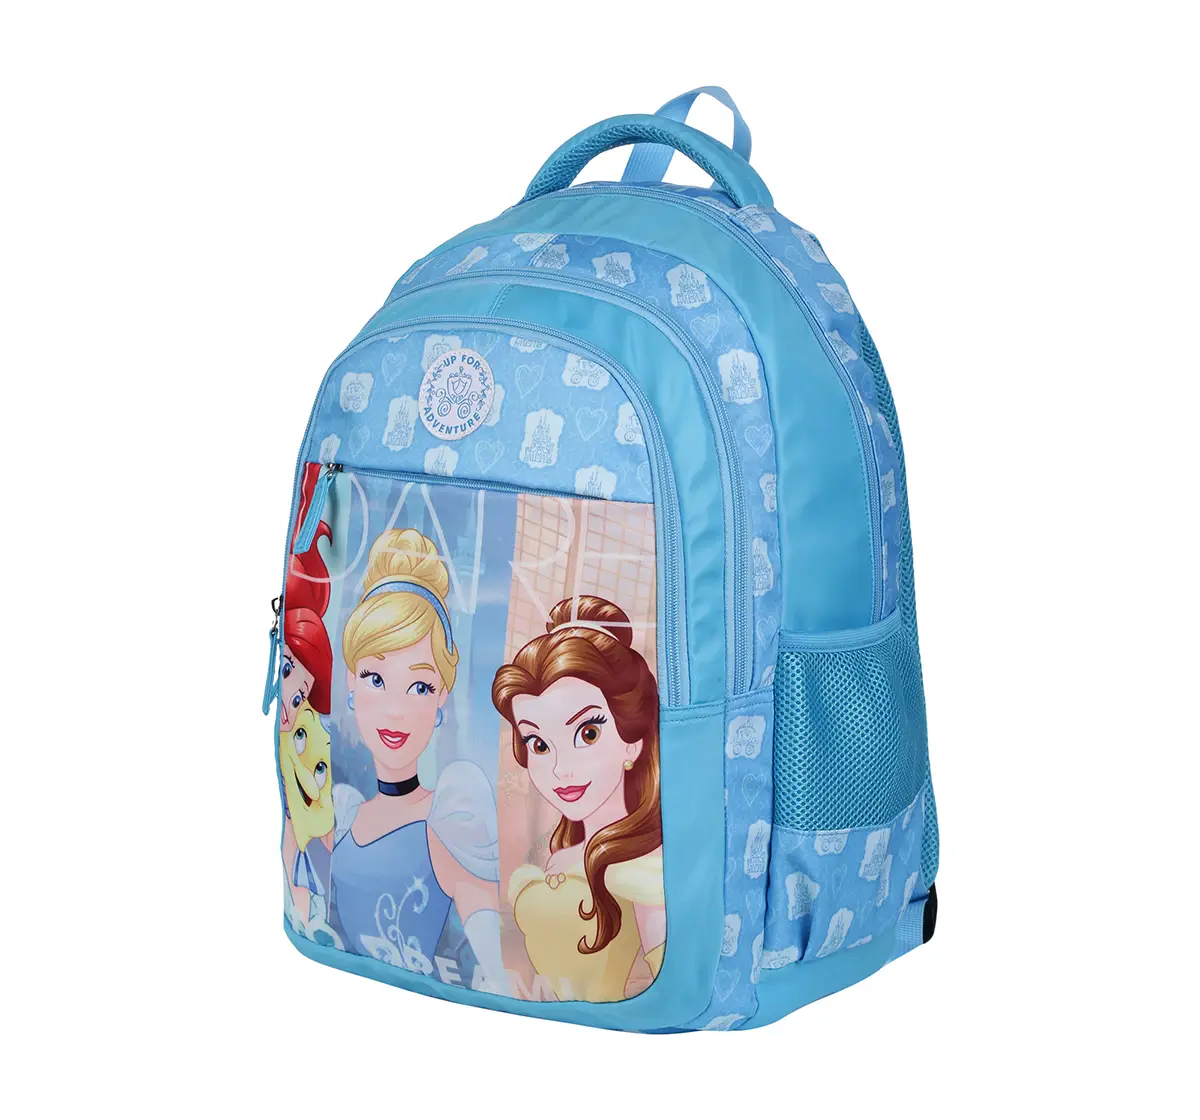 Disney Princess Adventure Blue 17" Backpack Bags for age 3Y+ 